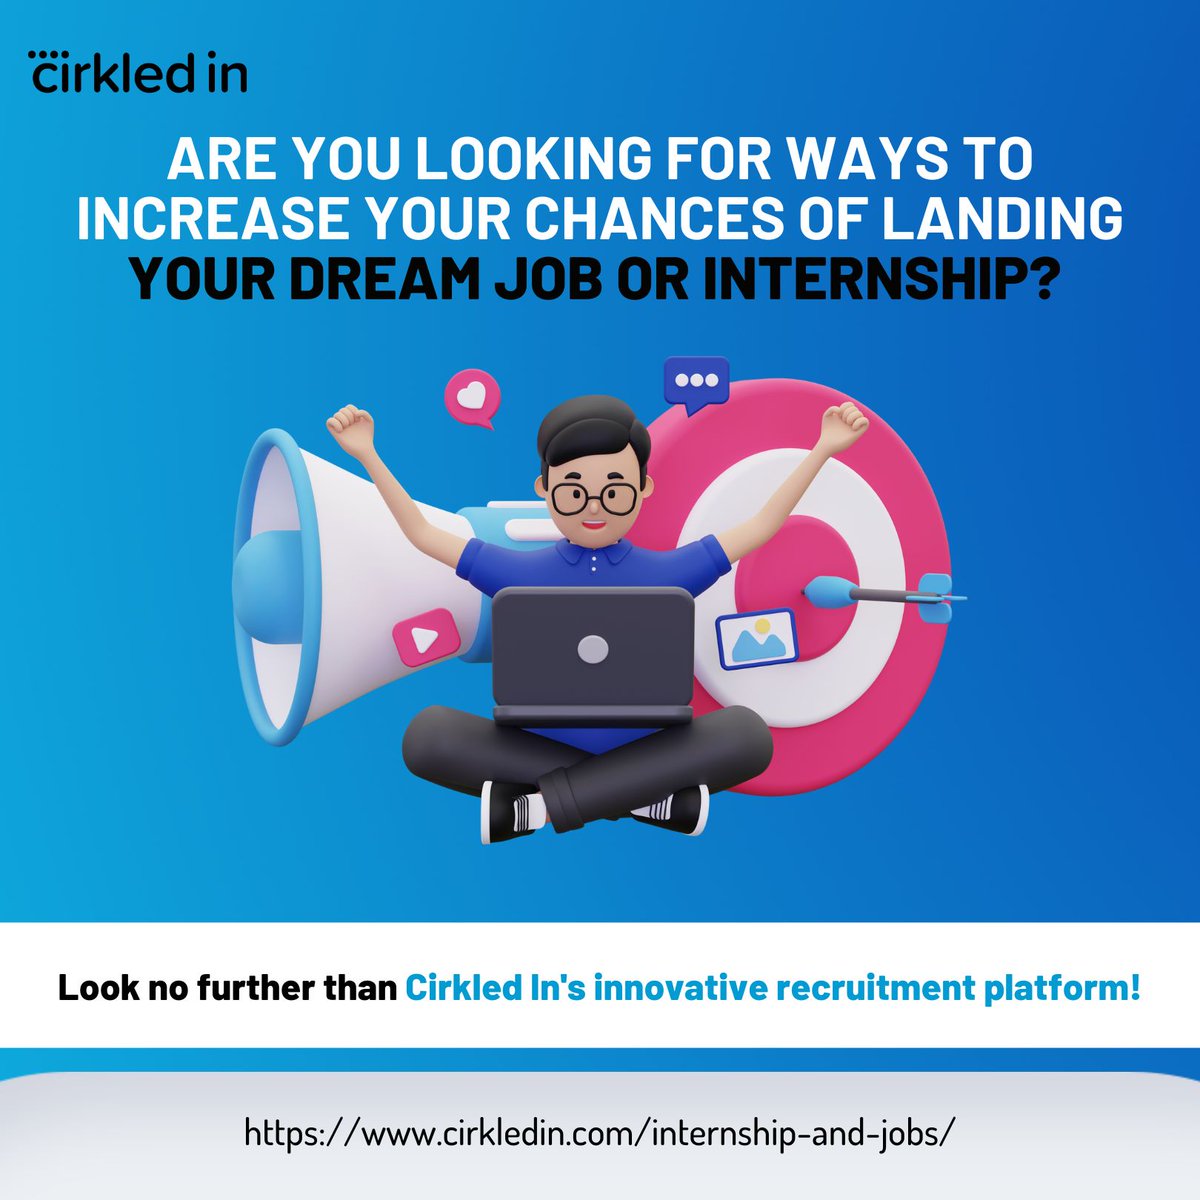 Sign up with Cirkled In today and maximize your chances of getting discovered

cirkledin.com/internship-and…

#LandYourDreamJob #InternshipOpportunities #RecruitmentMadeEasy #FindYourNextJob #CuttingEdgeRecruitment #TopTalentRetention #InnovativeRecruitment #MaximizeYourPotential